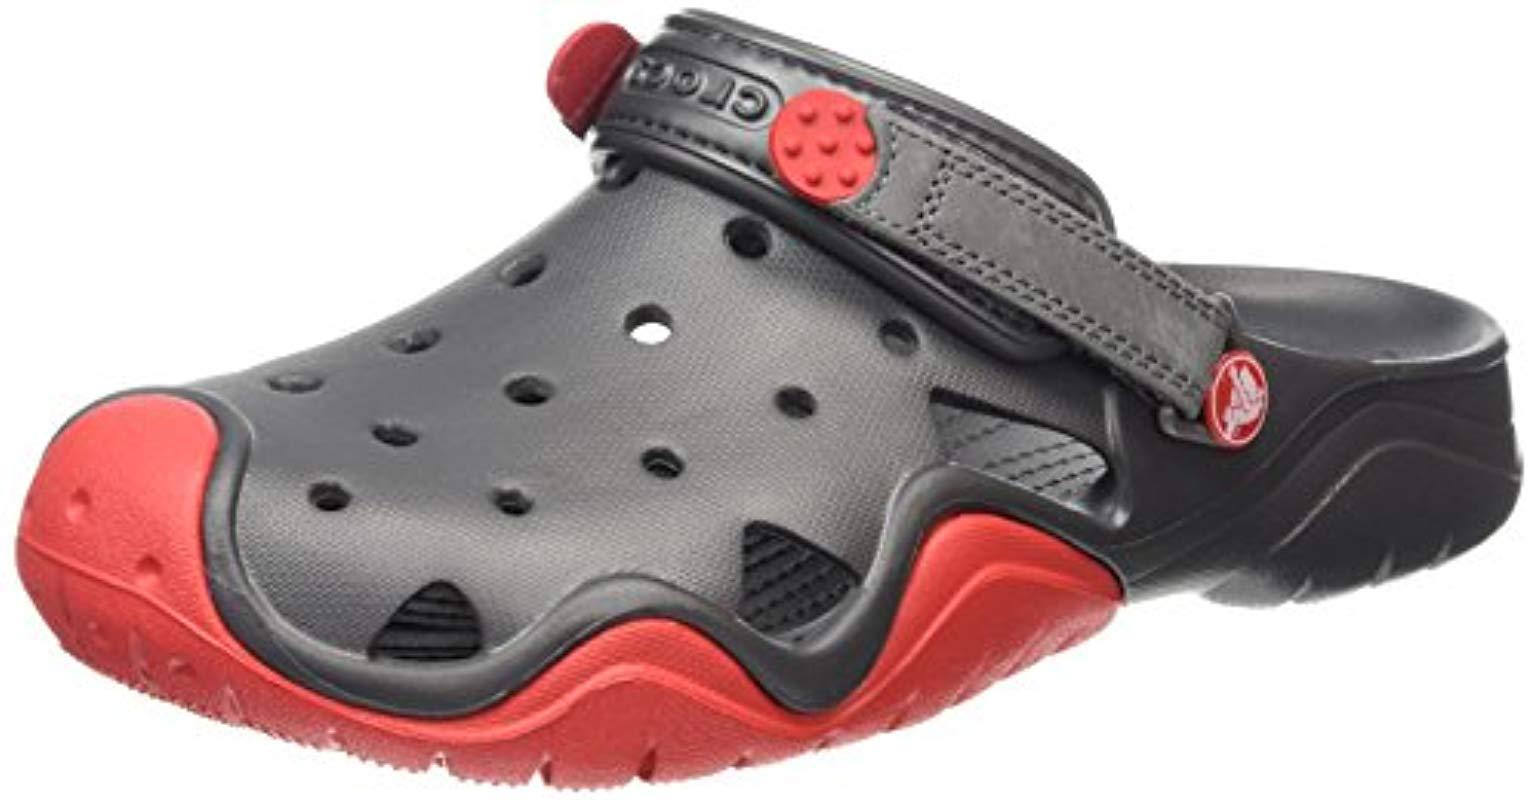 Crocs™ Swiftwater Clog, Casual Lightweight Beach Or Water Shoe for Men |  Lyst